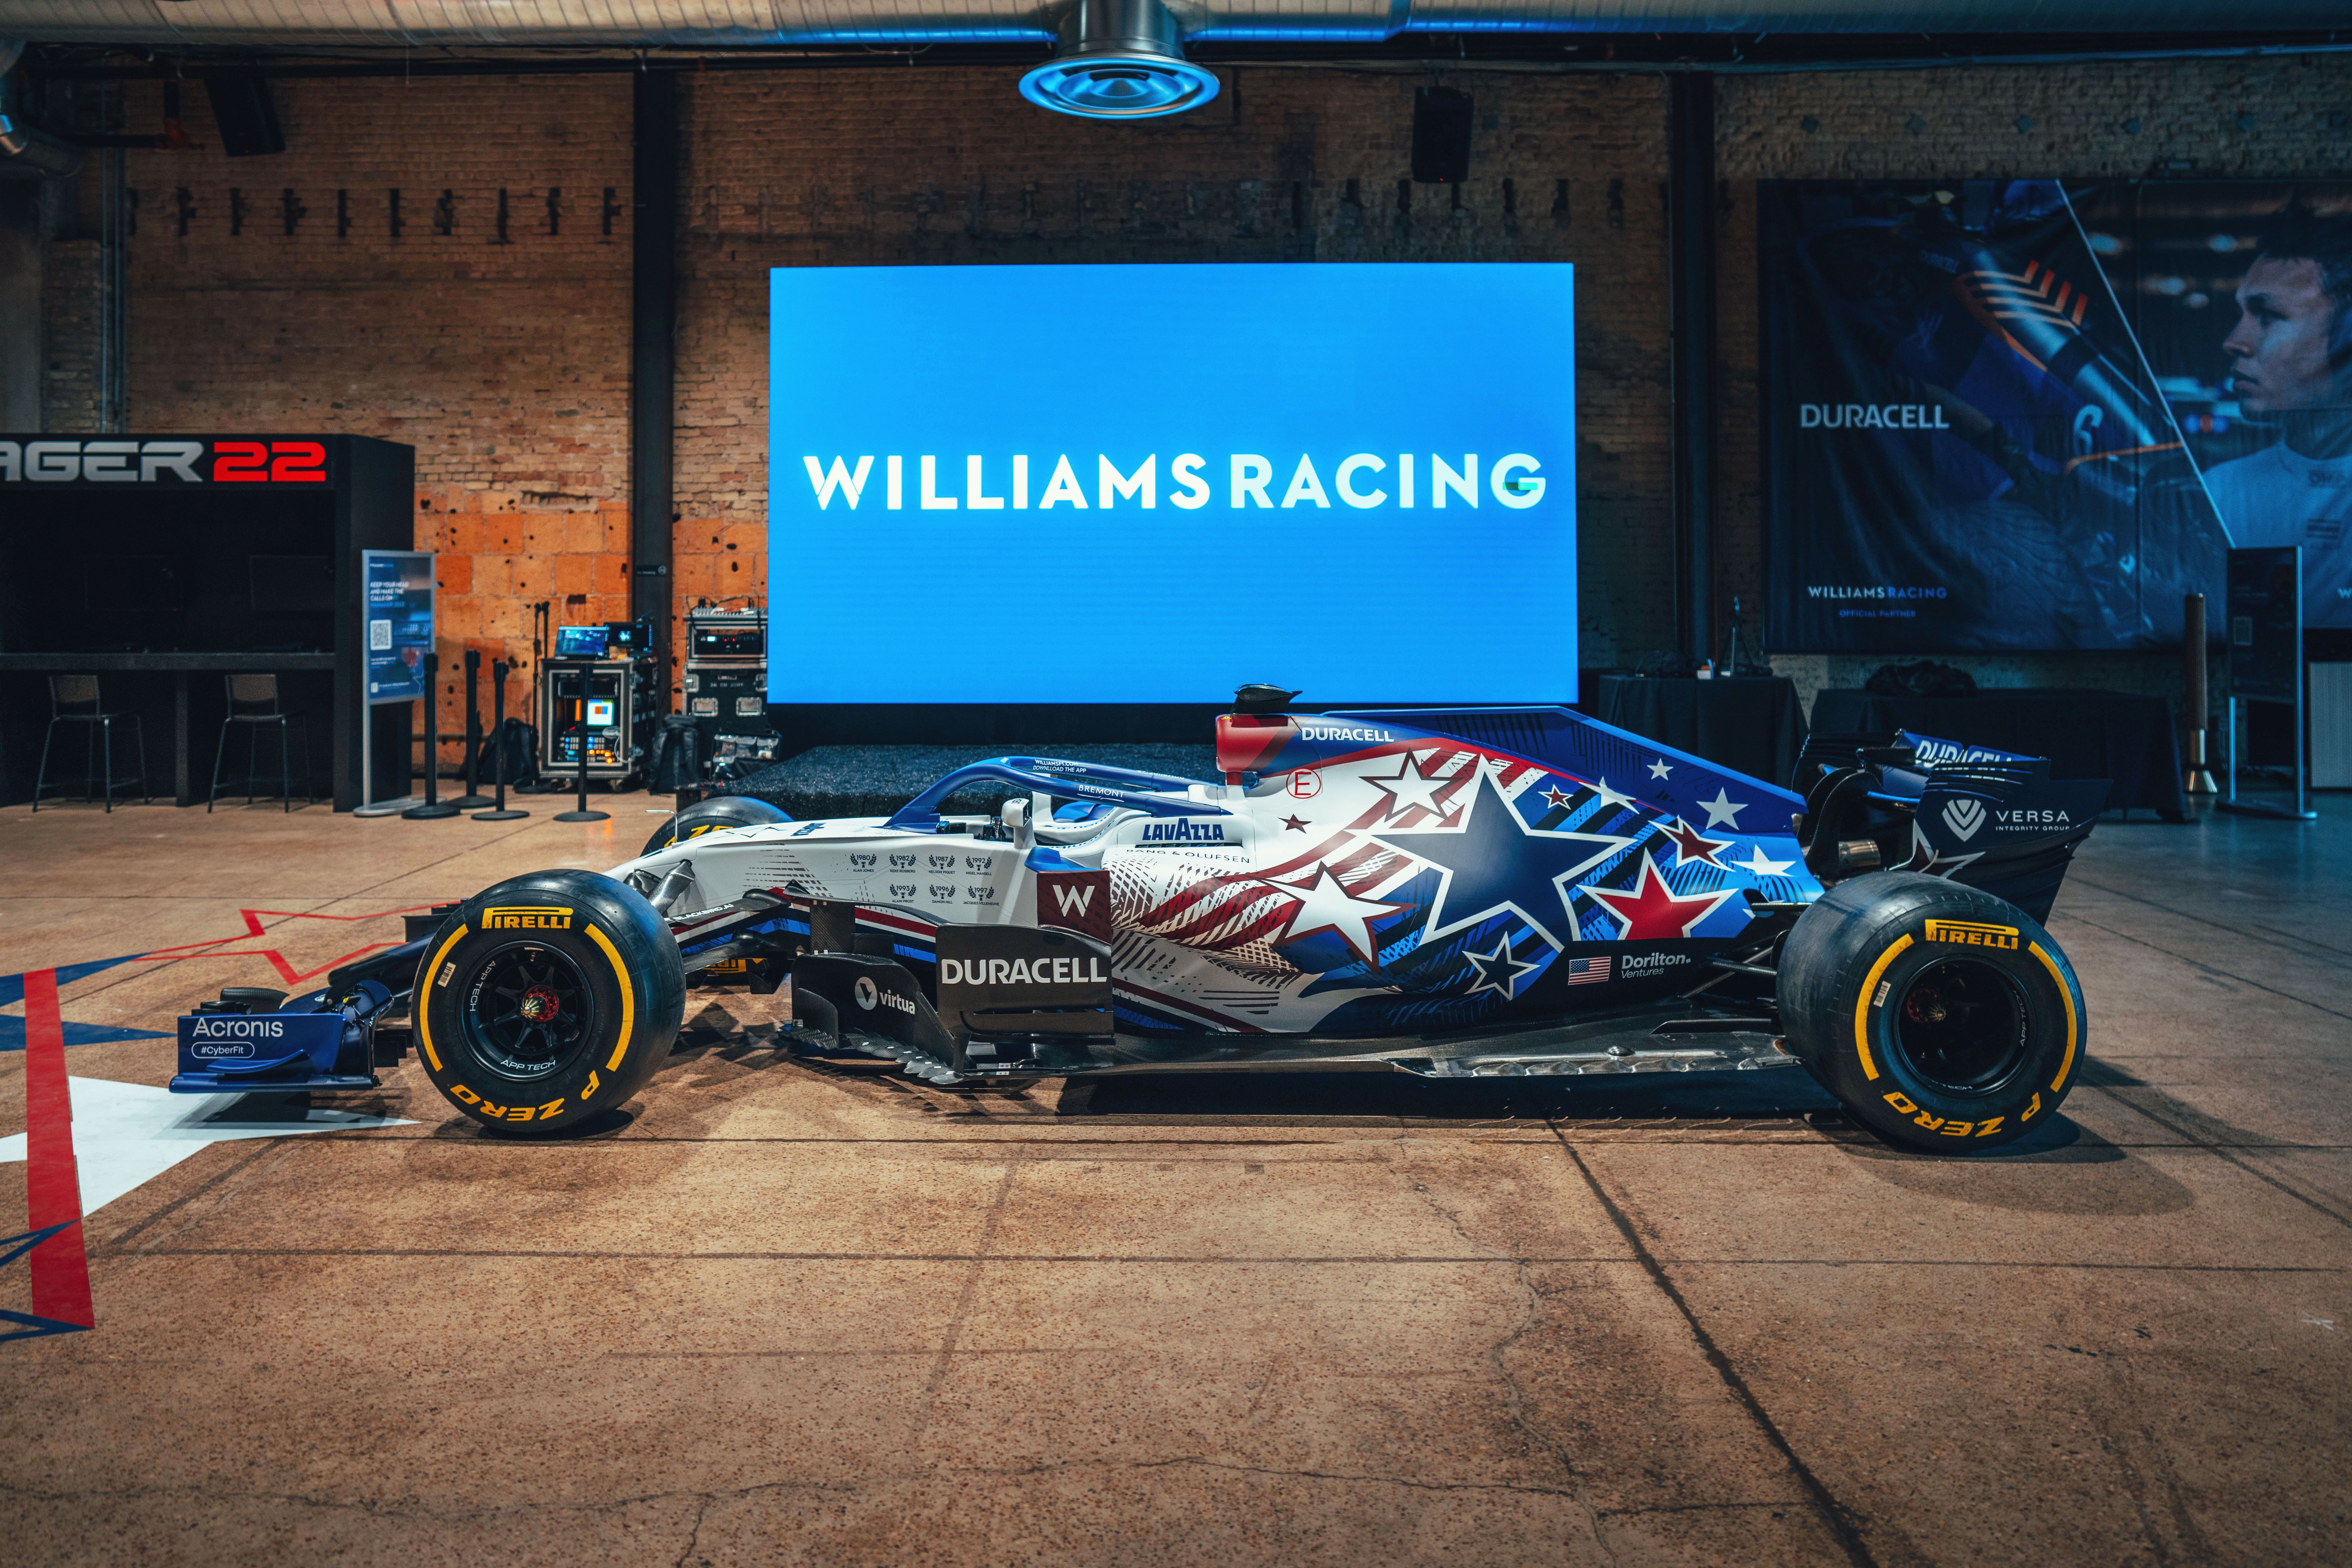 Our Austin pop-up is now open! Williams Racing